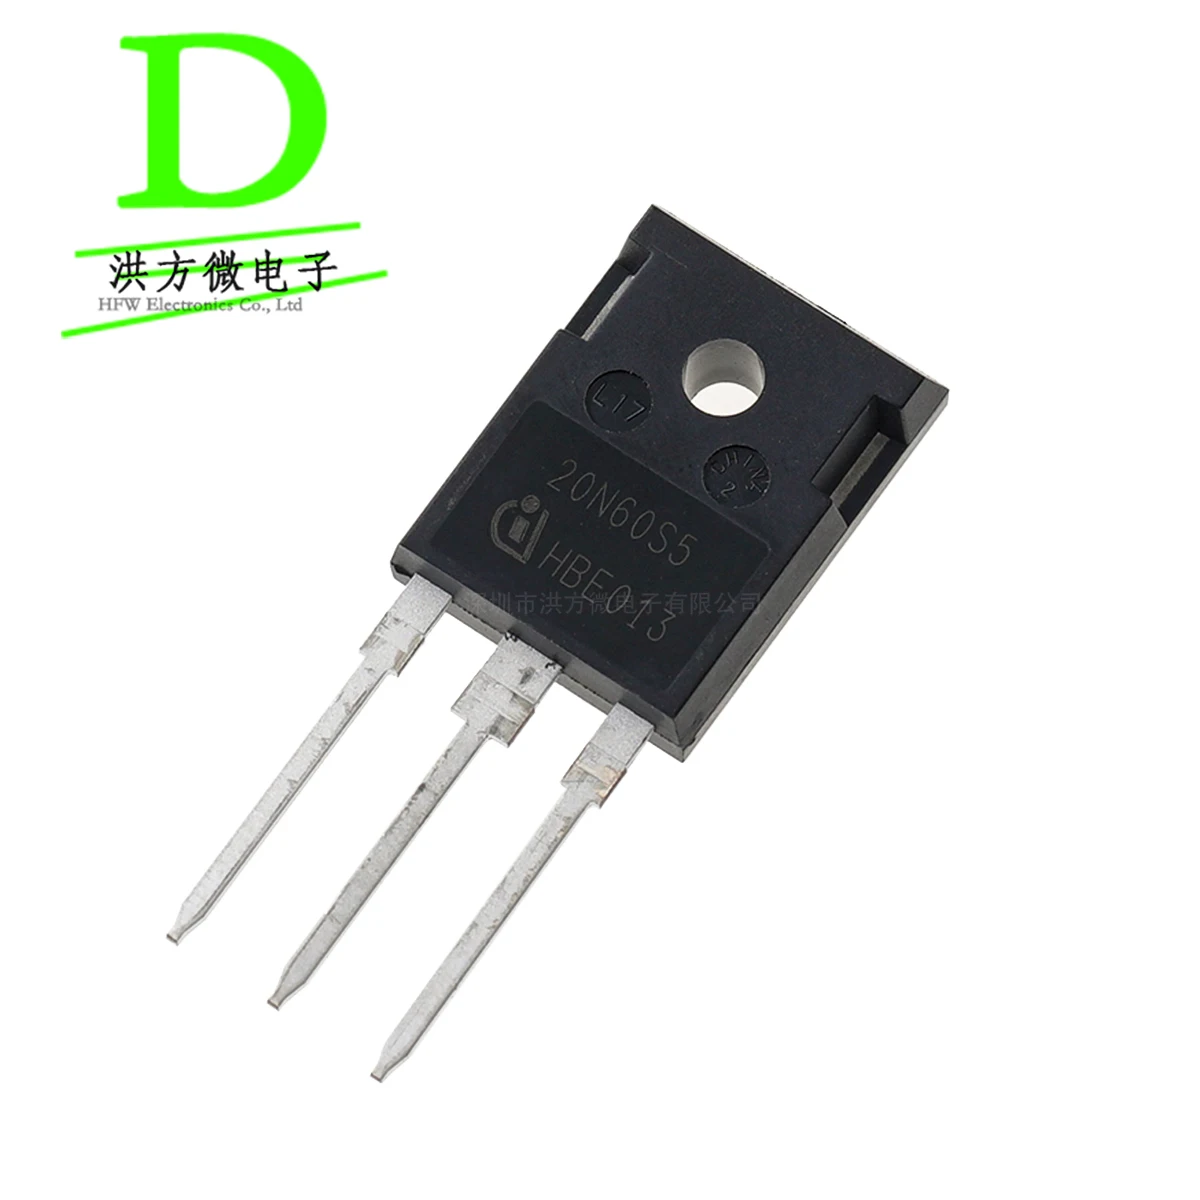 

New and Original N-channel MOSFET 600V 20A SPW20N60S5 TO-247 screen printing 20N65S5 SPW20N60S5FKSA1